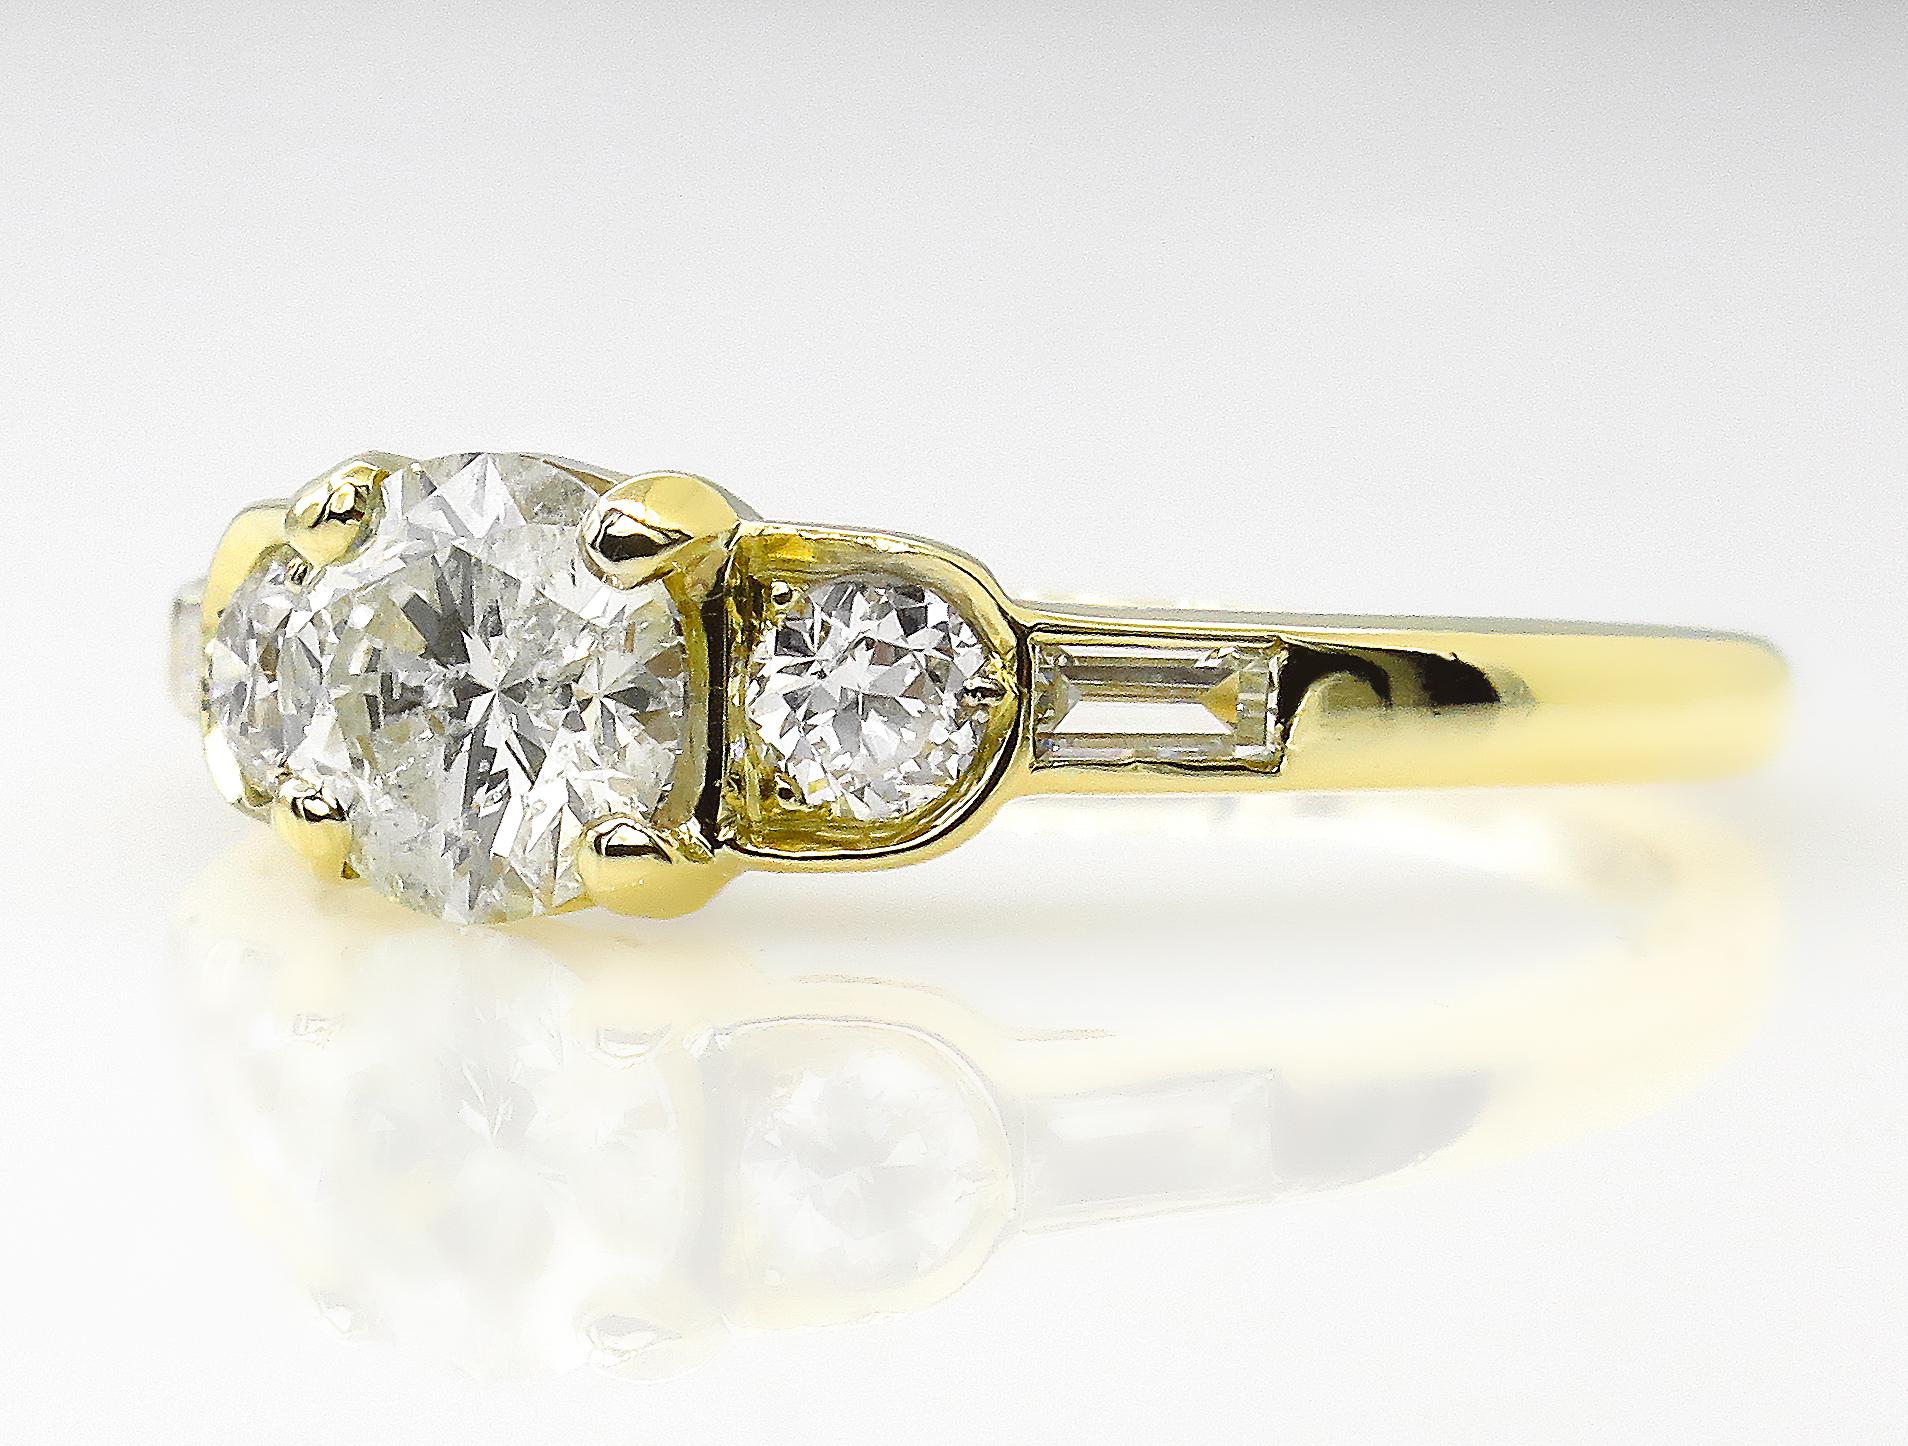 A very ELEGANT and CLASSY 5 Stone Diamond ring in 18K Yellow gold. You'll love its color, the way it catches the light with lots of fire, its beautiful creation of pure symmetry. First quarter-20th century.
Featuring a center 0.63ct ROUND Brilliant